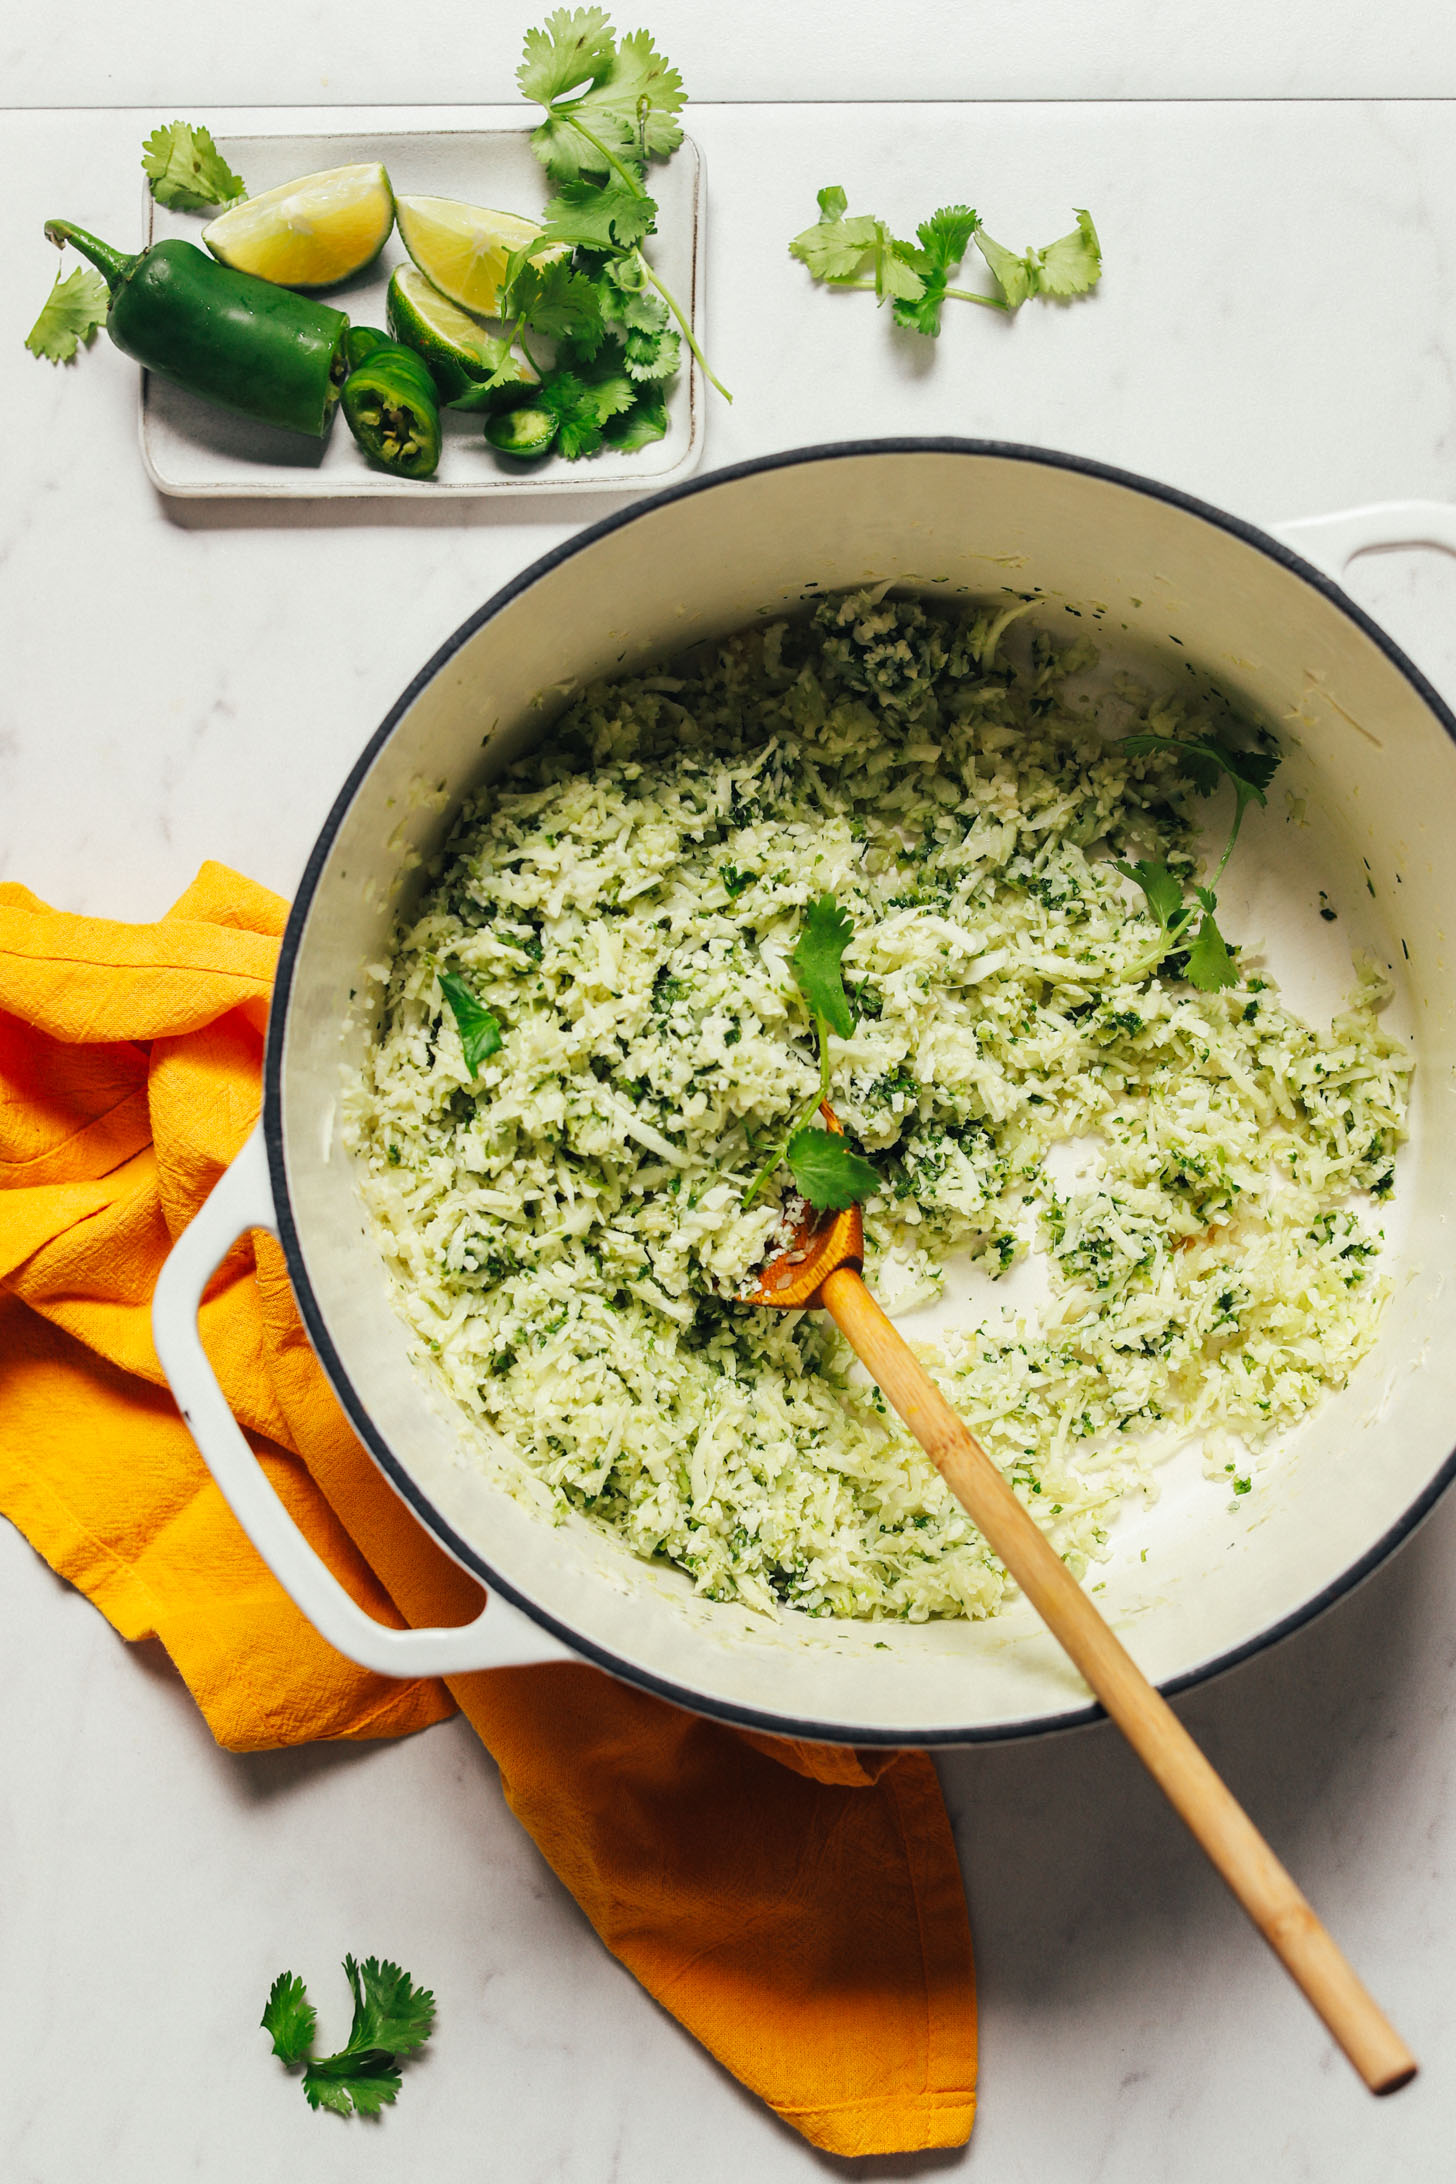 Pot of our Cauliflower Green Rice recipe made with lime, herbs, and peppers